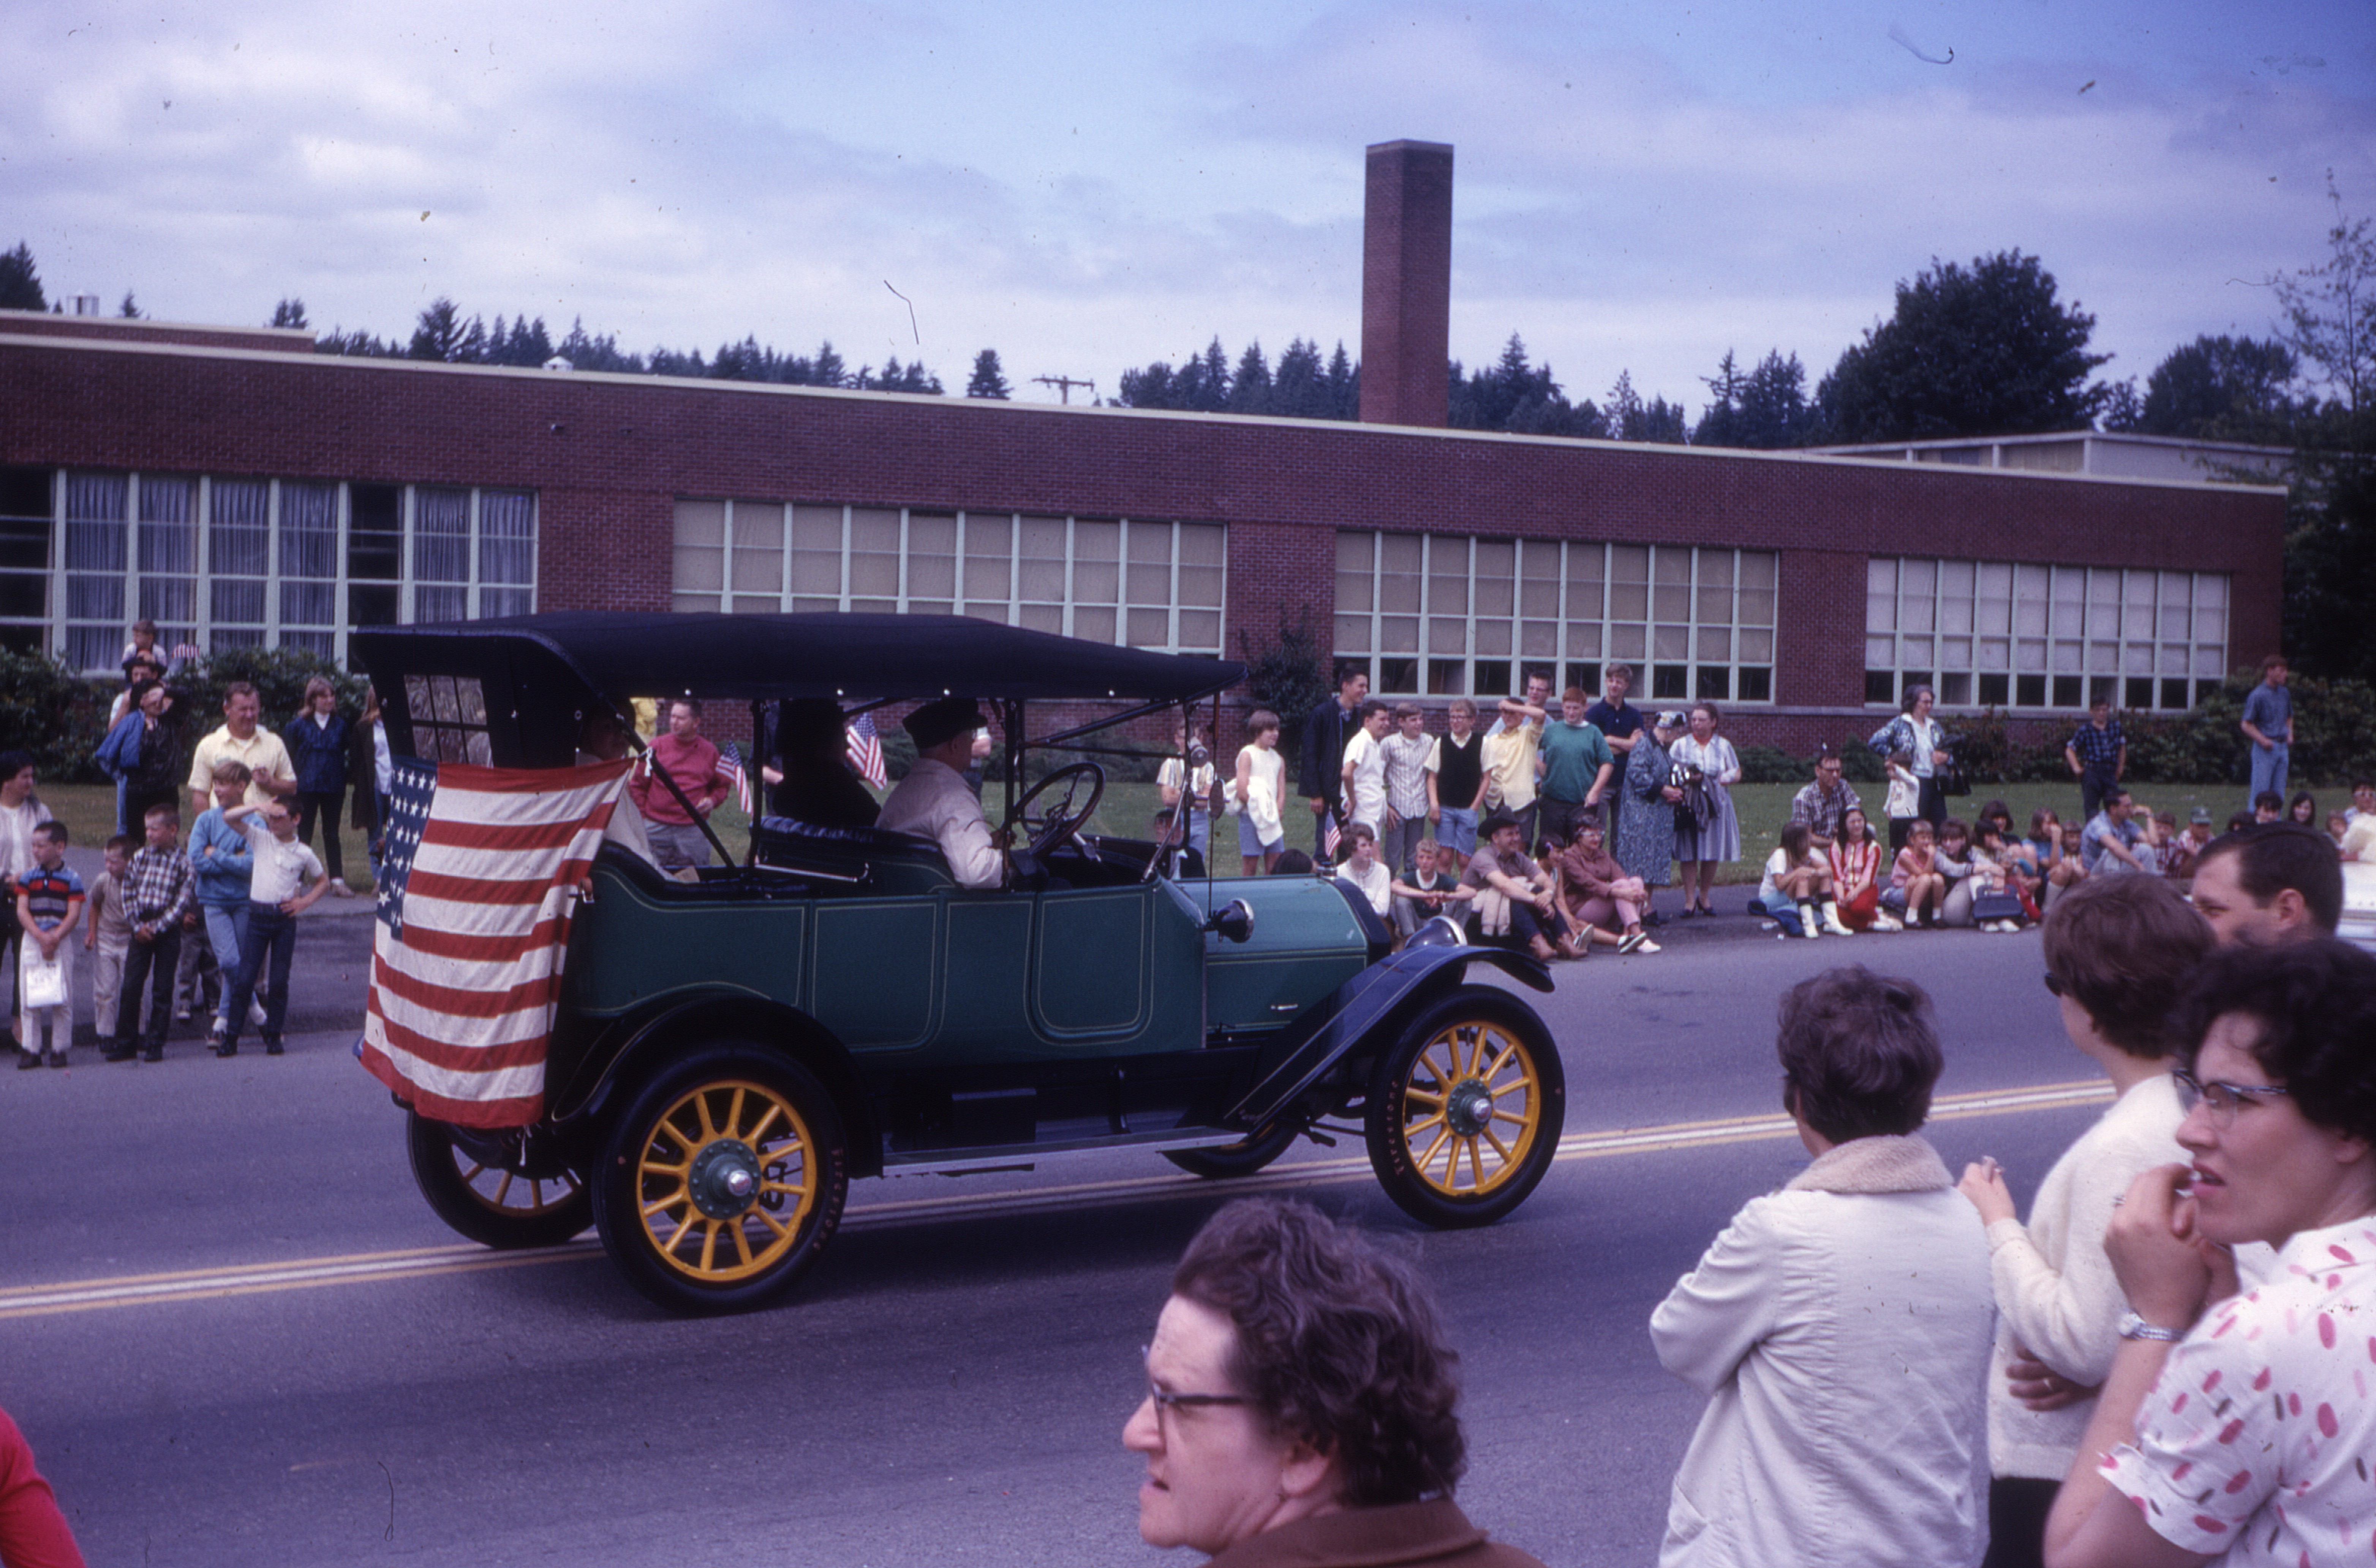 A vintage sedan, one of many Horseless Carriages in the 1966 parade, drives past Ricketts Elementary School. The school's name honored a long-time community dentist and member of the Northshore District school board , Dr. G. E. Ricketts.